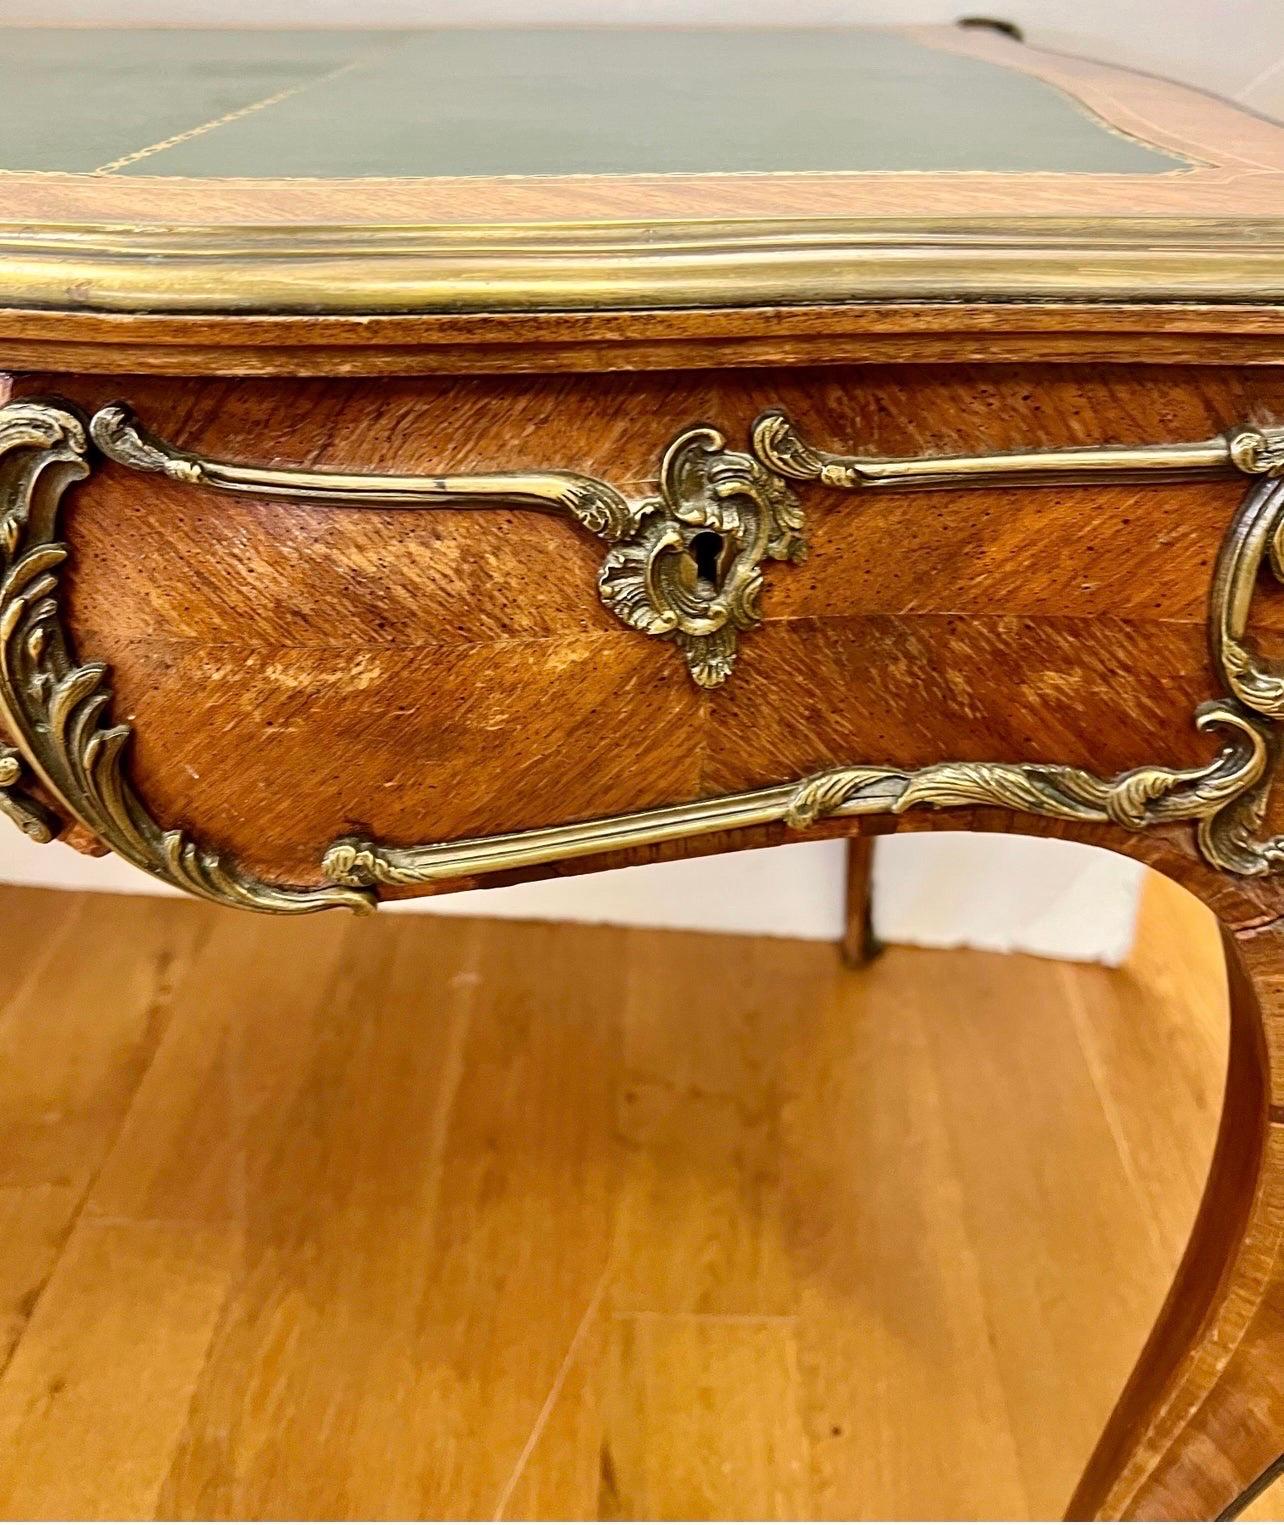 A magnificent antique fruitwood writing desk adorned in bronze and featuring a green leather top.  Made in France in the early 20th century.  Features three drawers at front.  A gorgeous addition to your home.  Why not own the best?
Protective